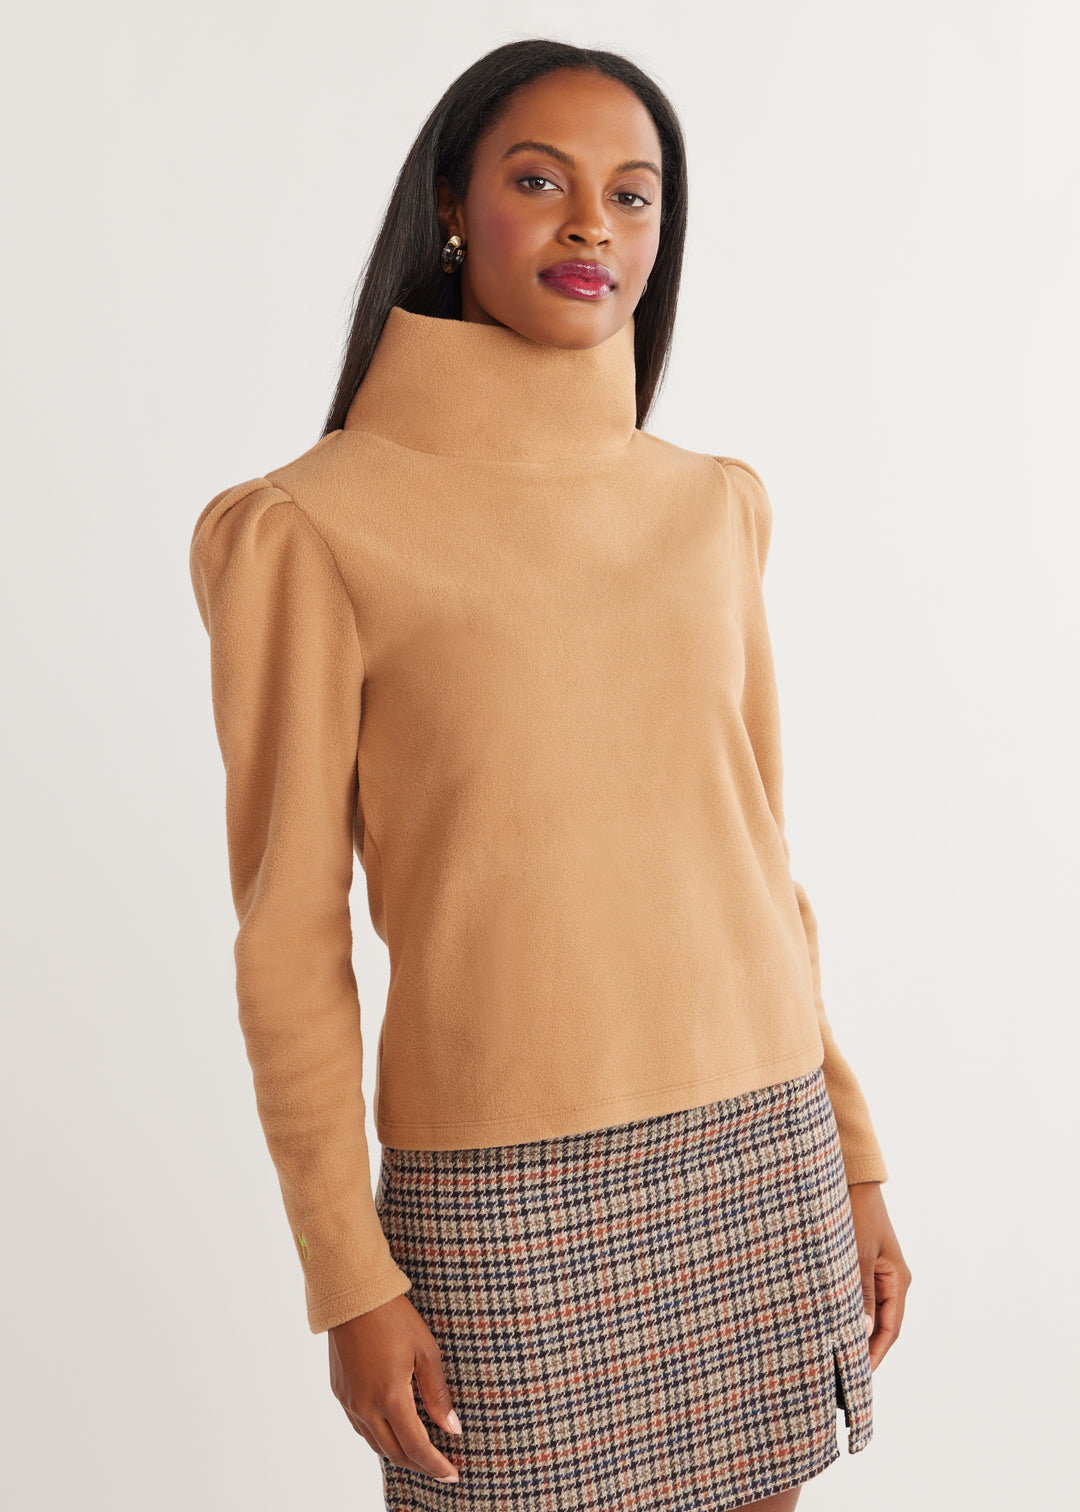 Straight From the Heart Turtleneck Sweater